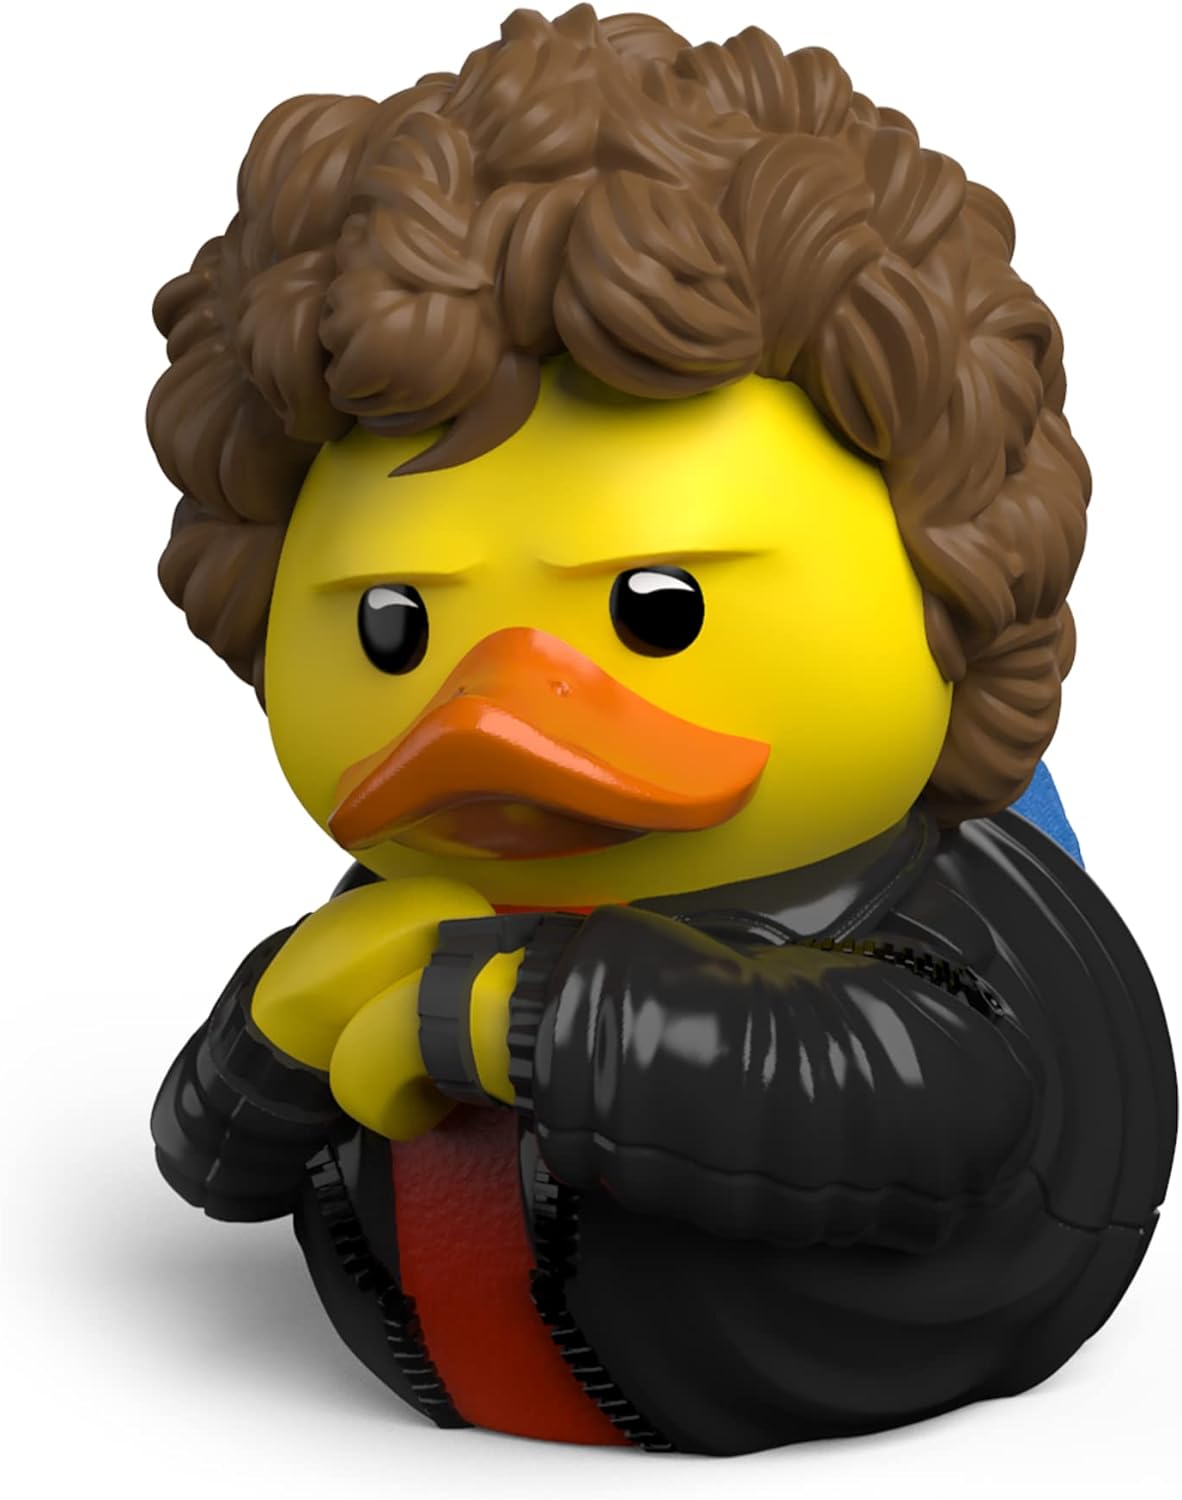 Nerdy Valentine's Day gift ideas for him: Michael Knight rubber duck